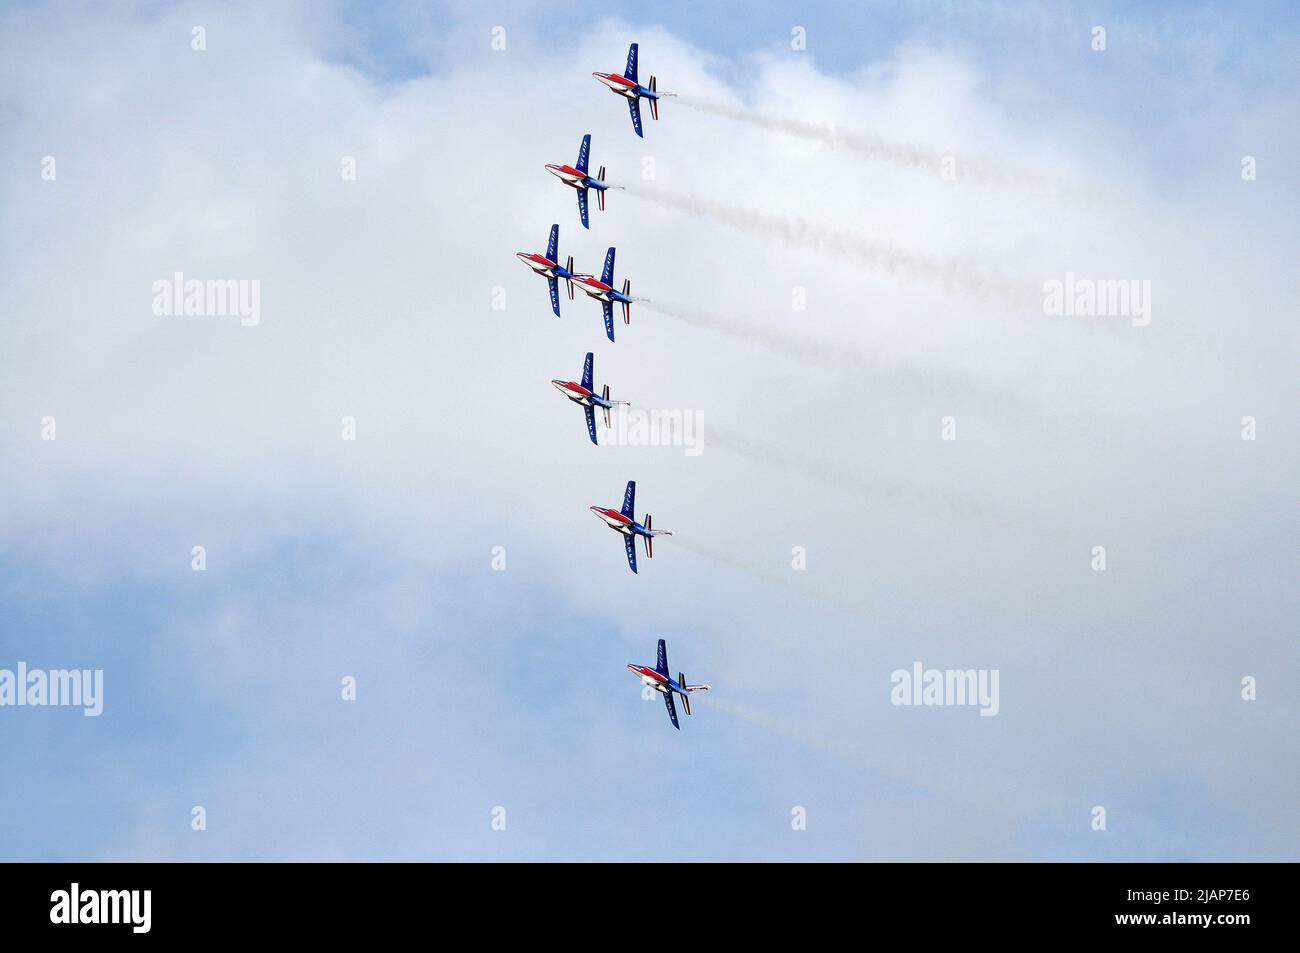 Patrouille de France at the Royal International Air Tattoo. Stock Photo